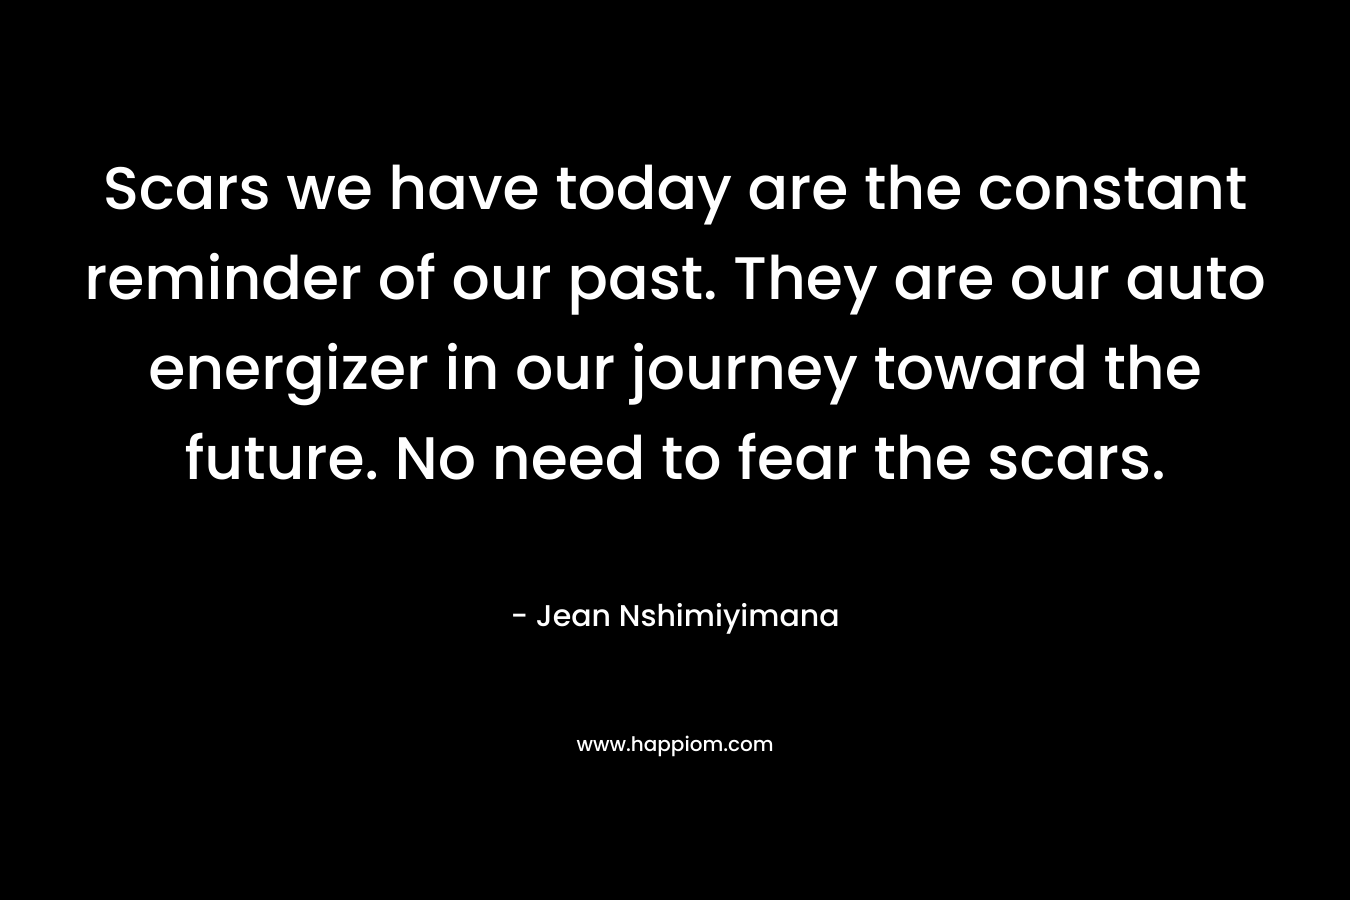 Scars we have today are the constant reminder of our past. They are our auto energizer in our journey toward the future. No need to fear the scars.